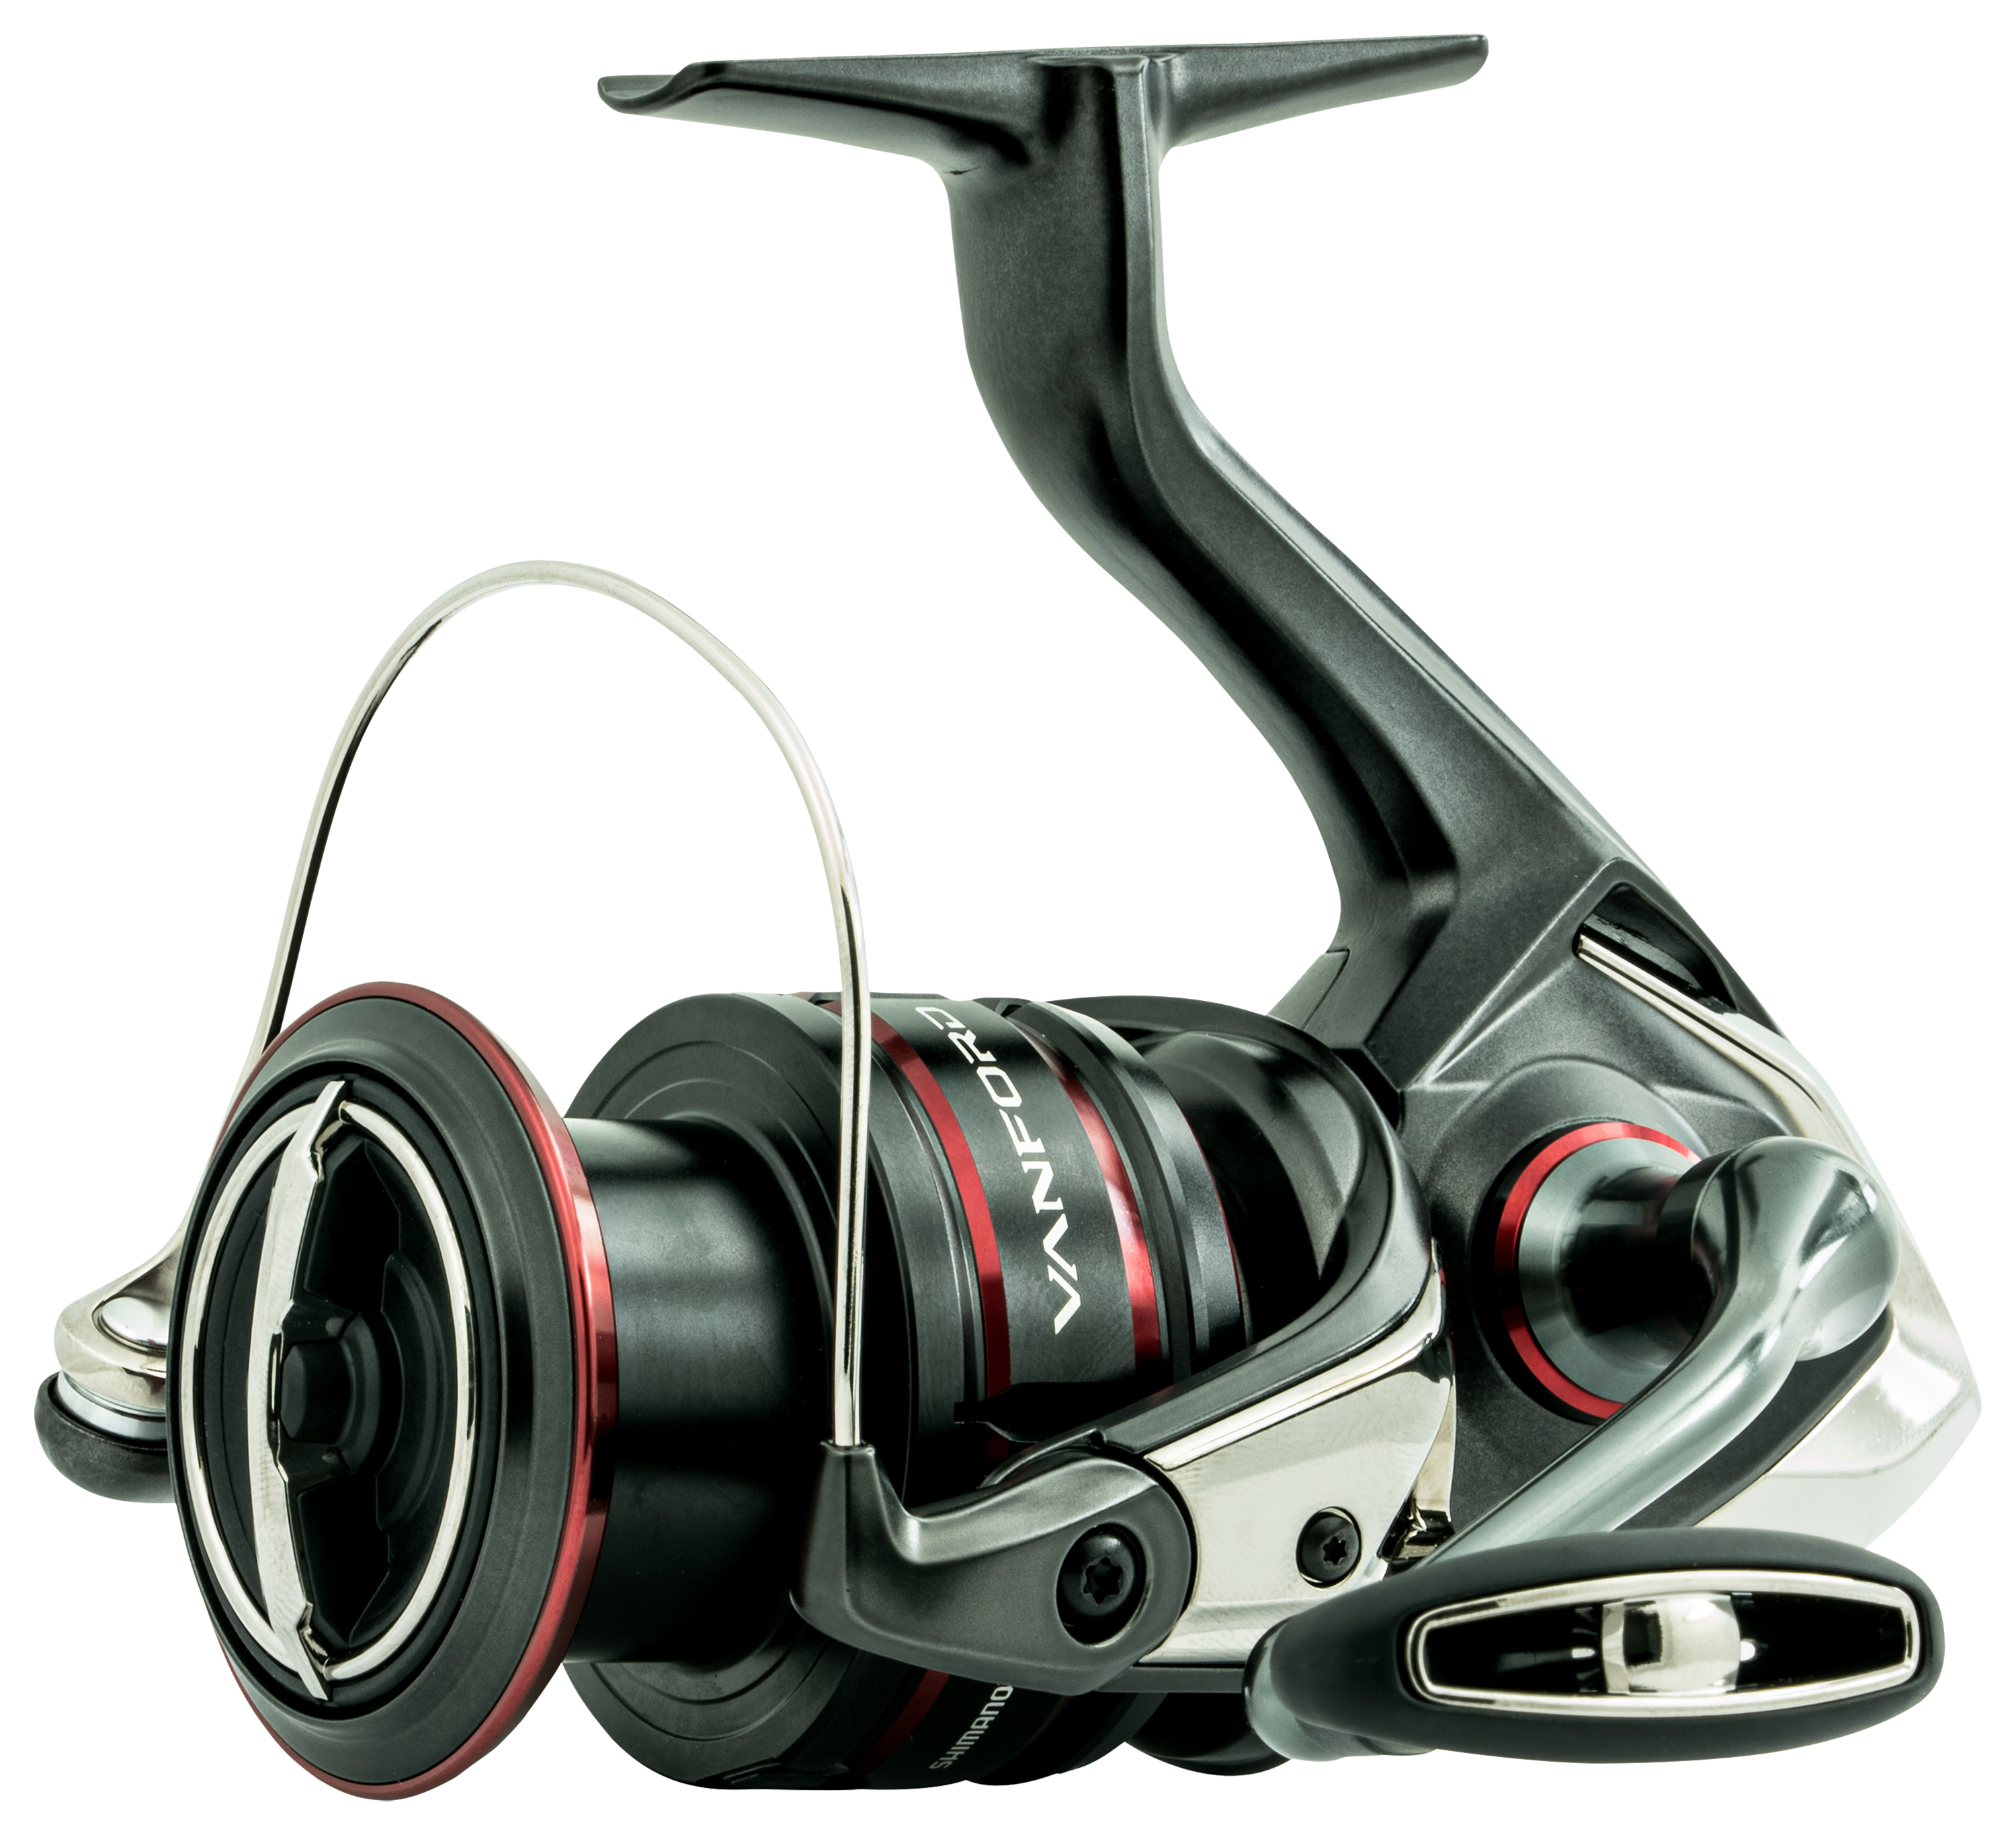 Shimano Spinning Reel Bass Fishing Reels for sale